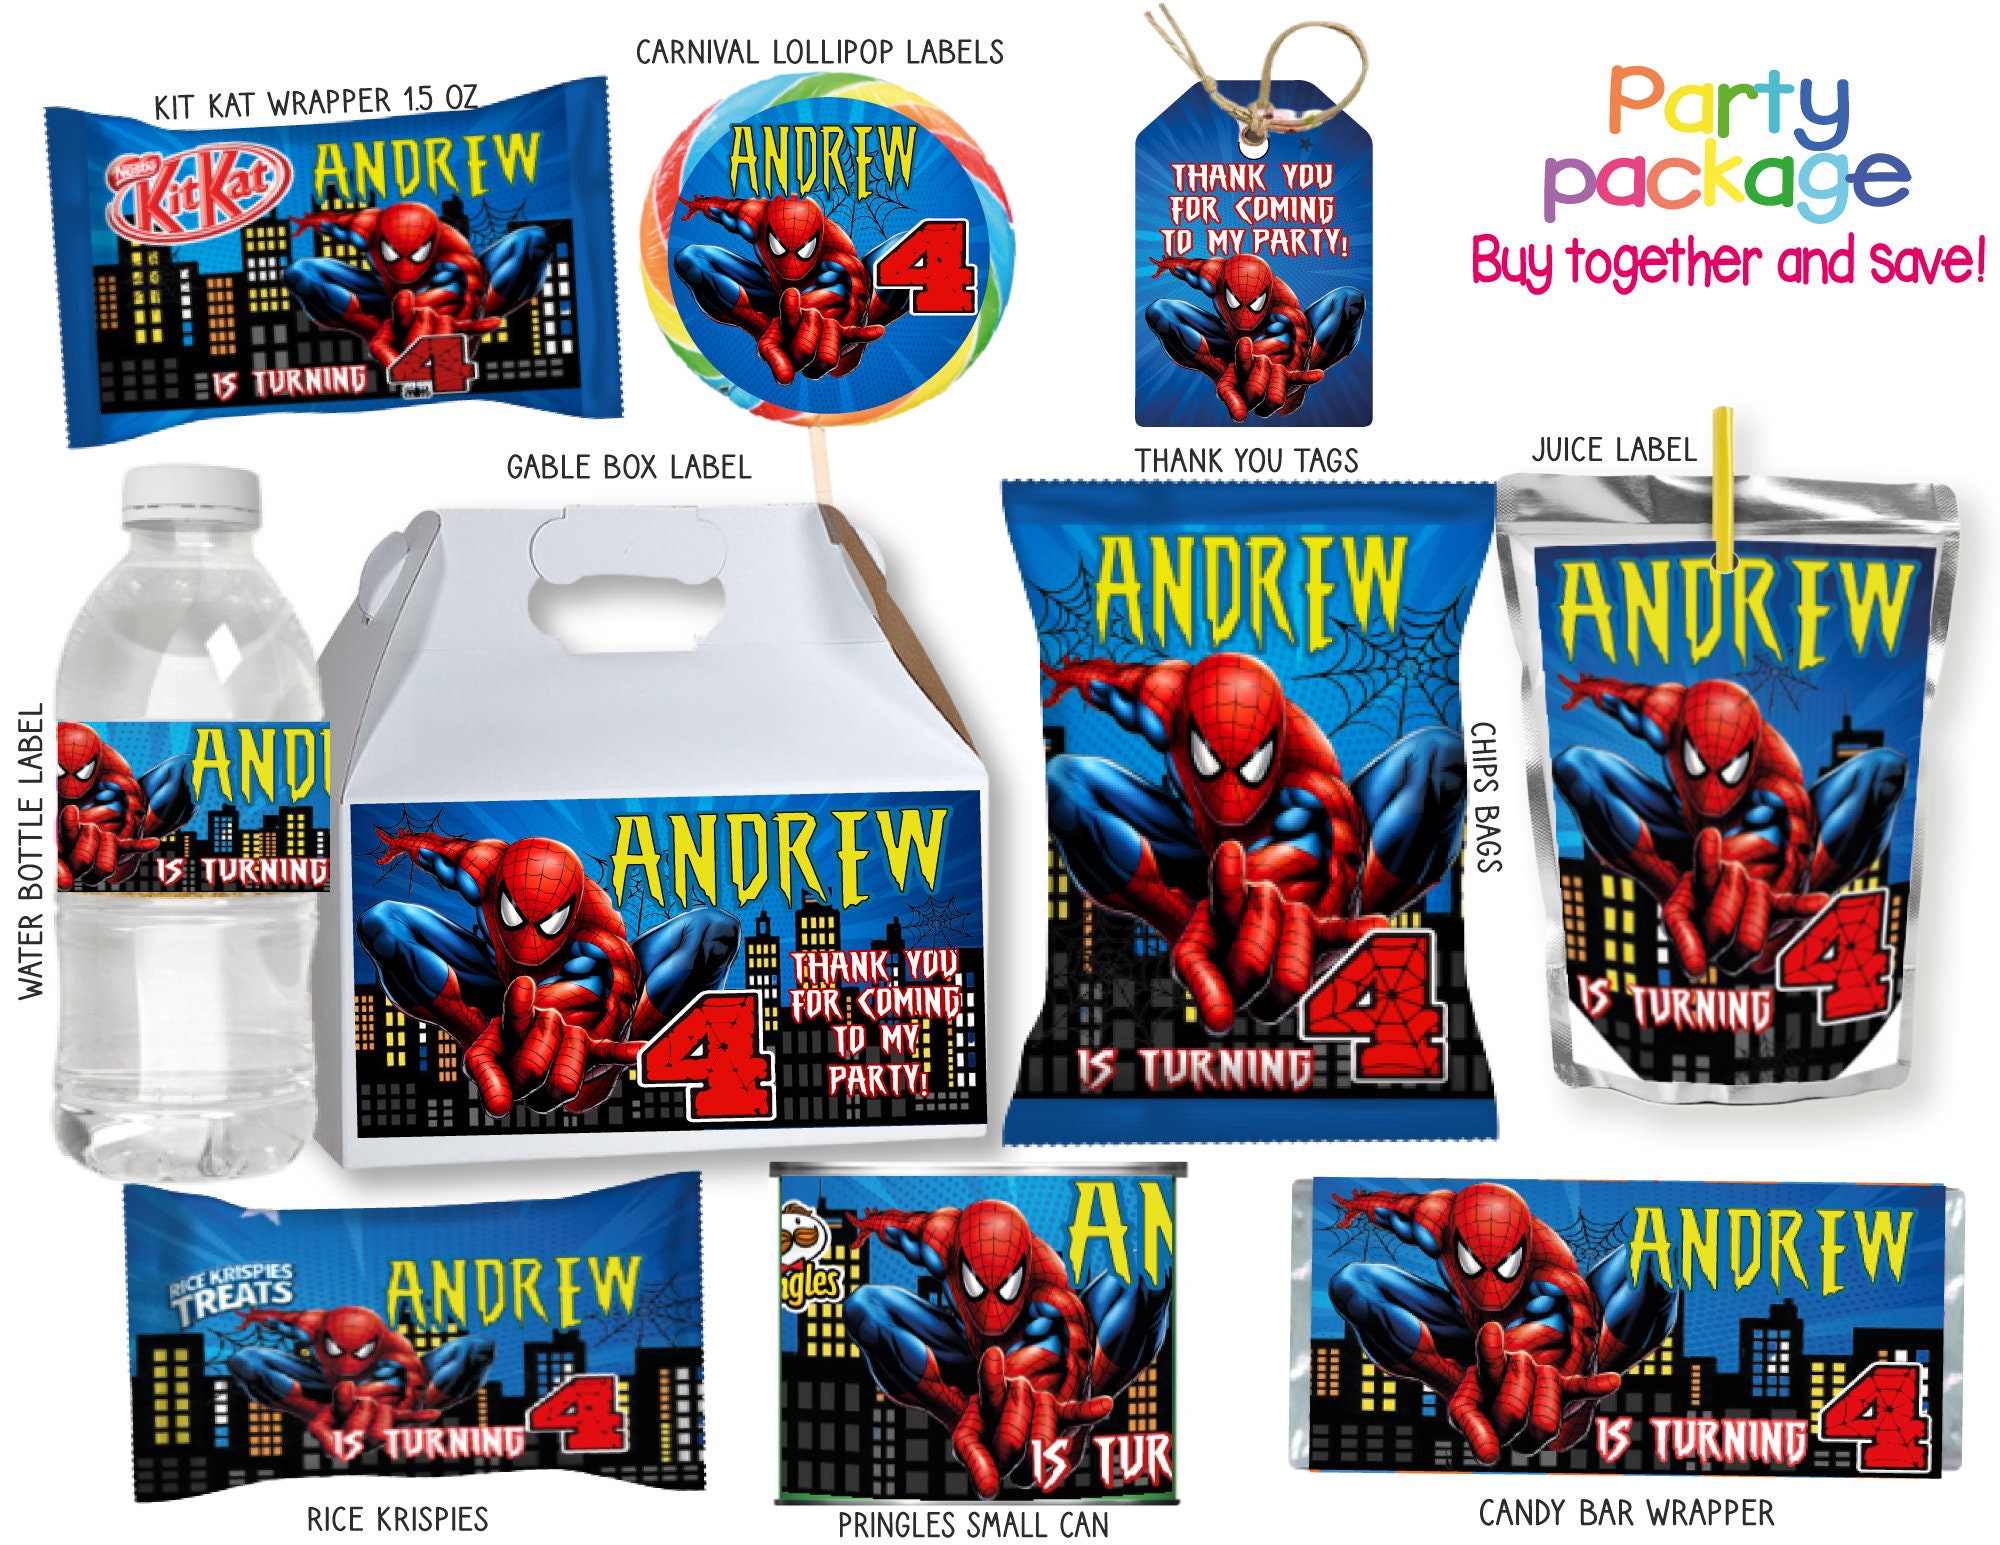  Marvel Shop Spiderman Lunch Bag For Boys, Kids Bundle ~  Spiderman Lunch Box And Cars Water Bottle Set For Spiderman School Supplies  With Spiderman Stickers And More (Superhero School Lunch) 